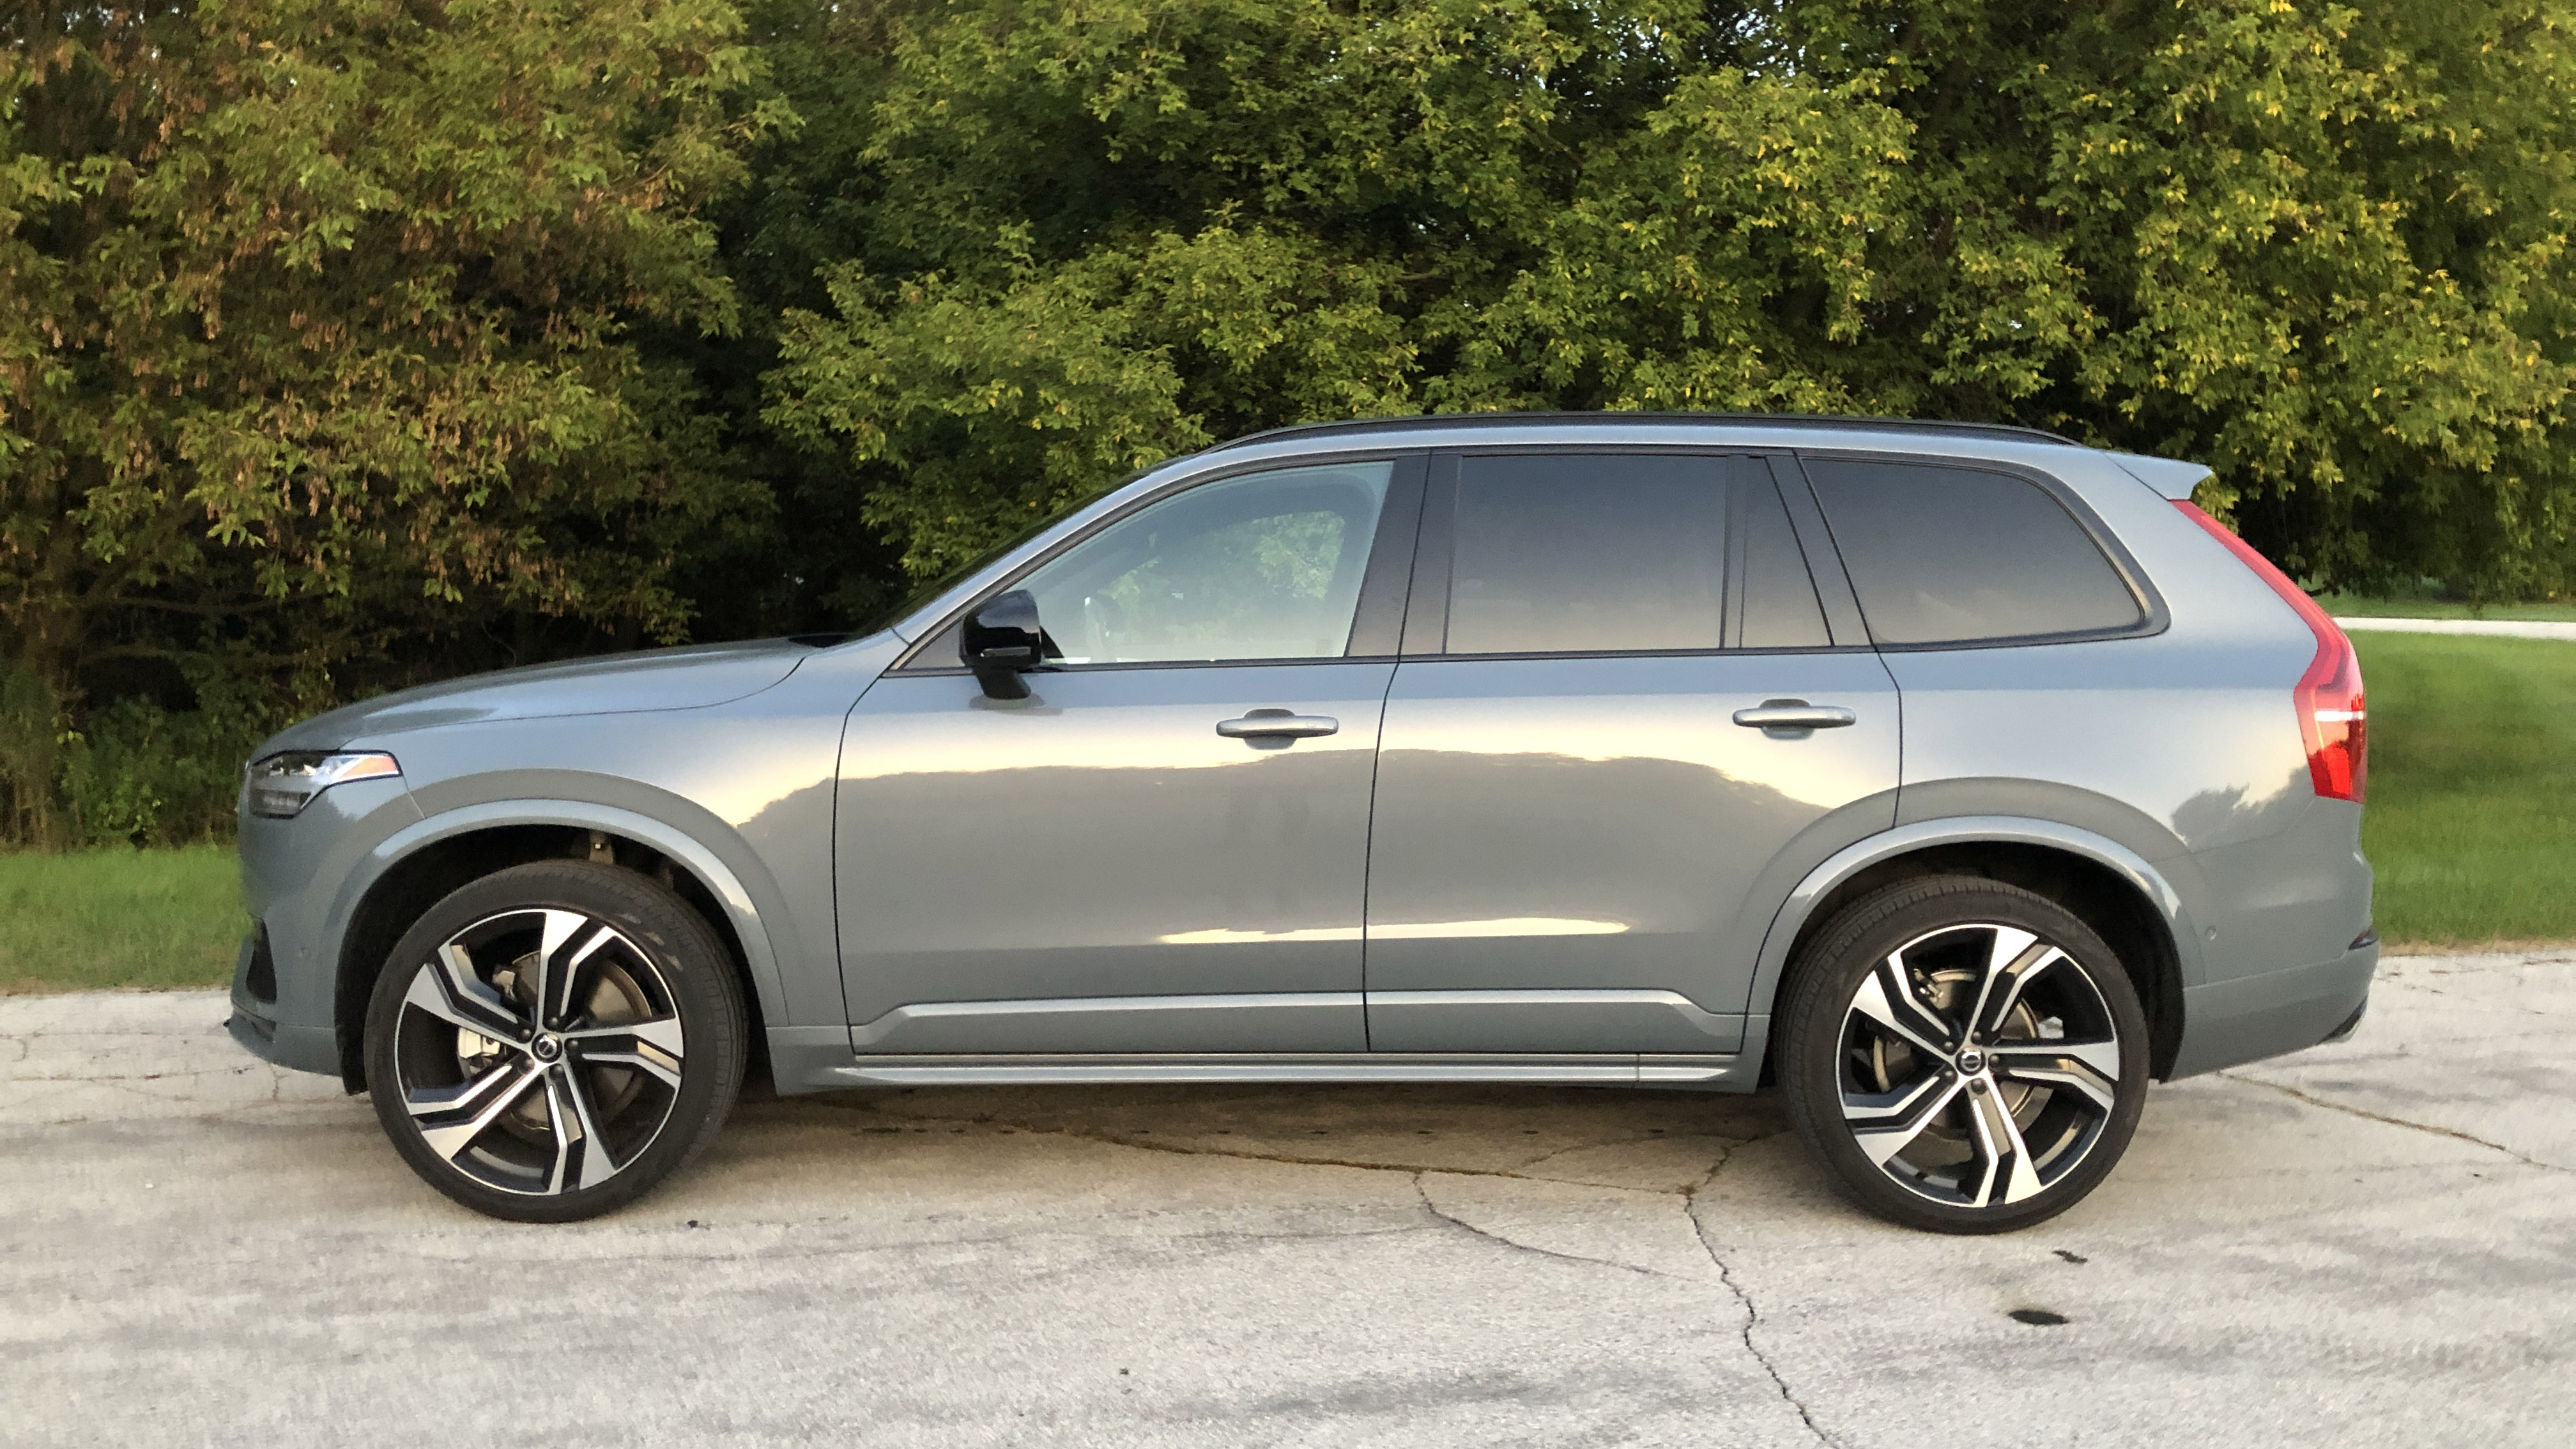 2020 Volvo XC90 T6 RDesign review Driving impressions, interior